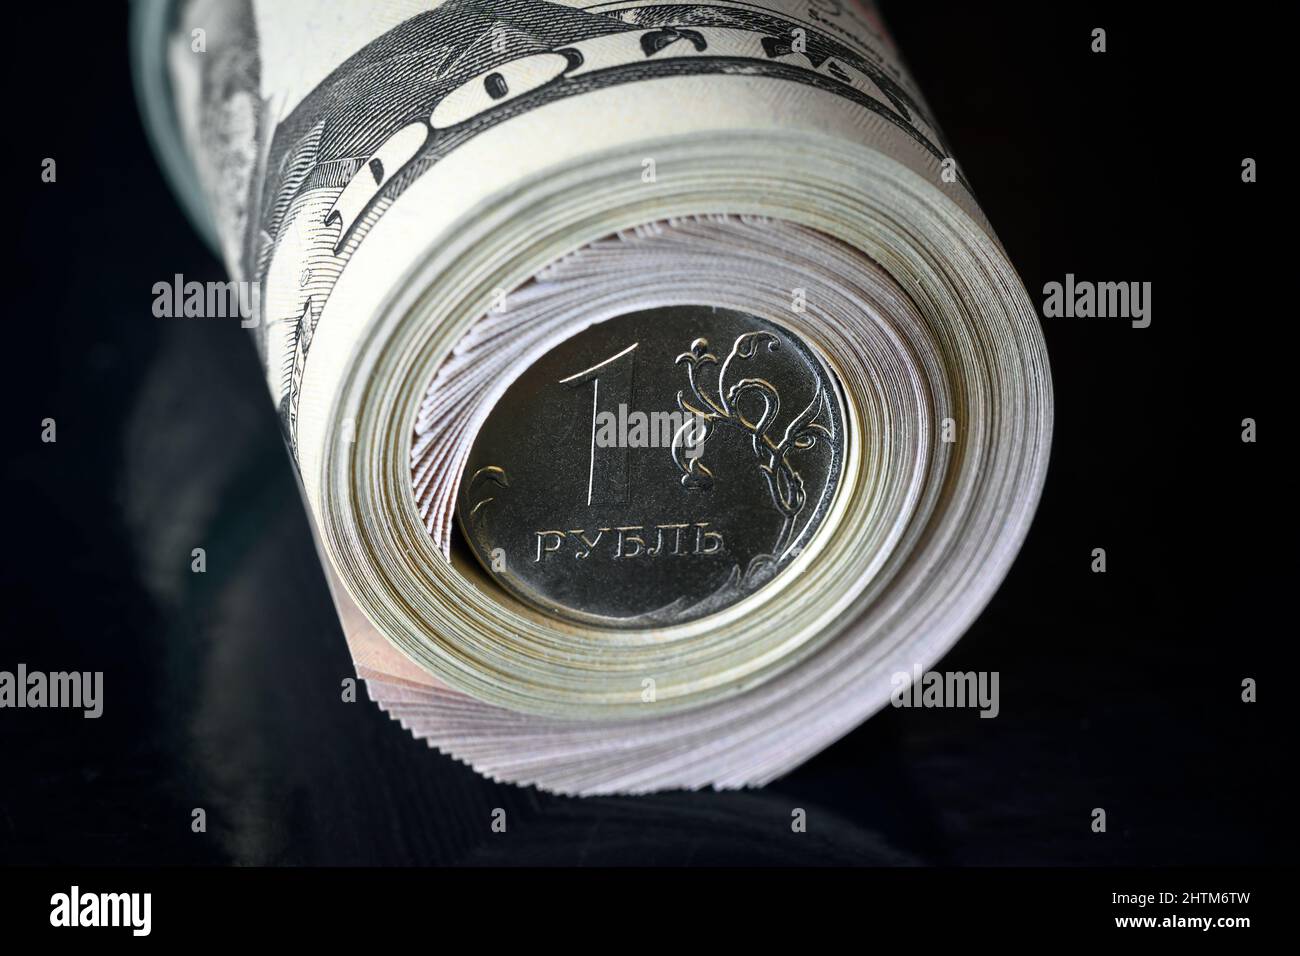 Russian ruble coin inside dollar bills roll, ruble money is under pressure from geopolitics. Concept of ruble devaluation, inflation in Russia, econom Stock Photo